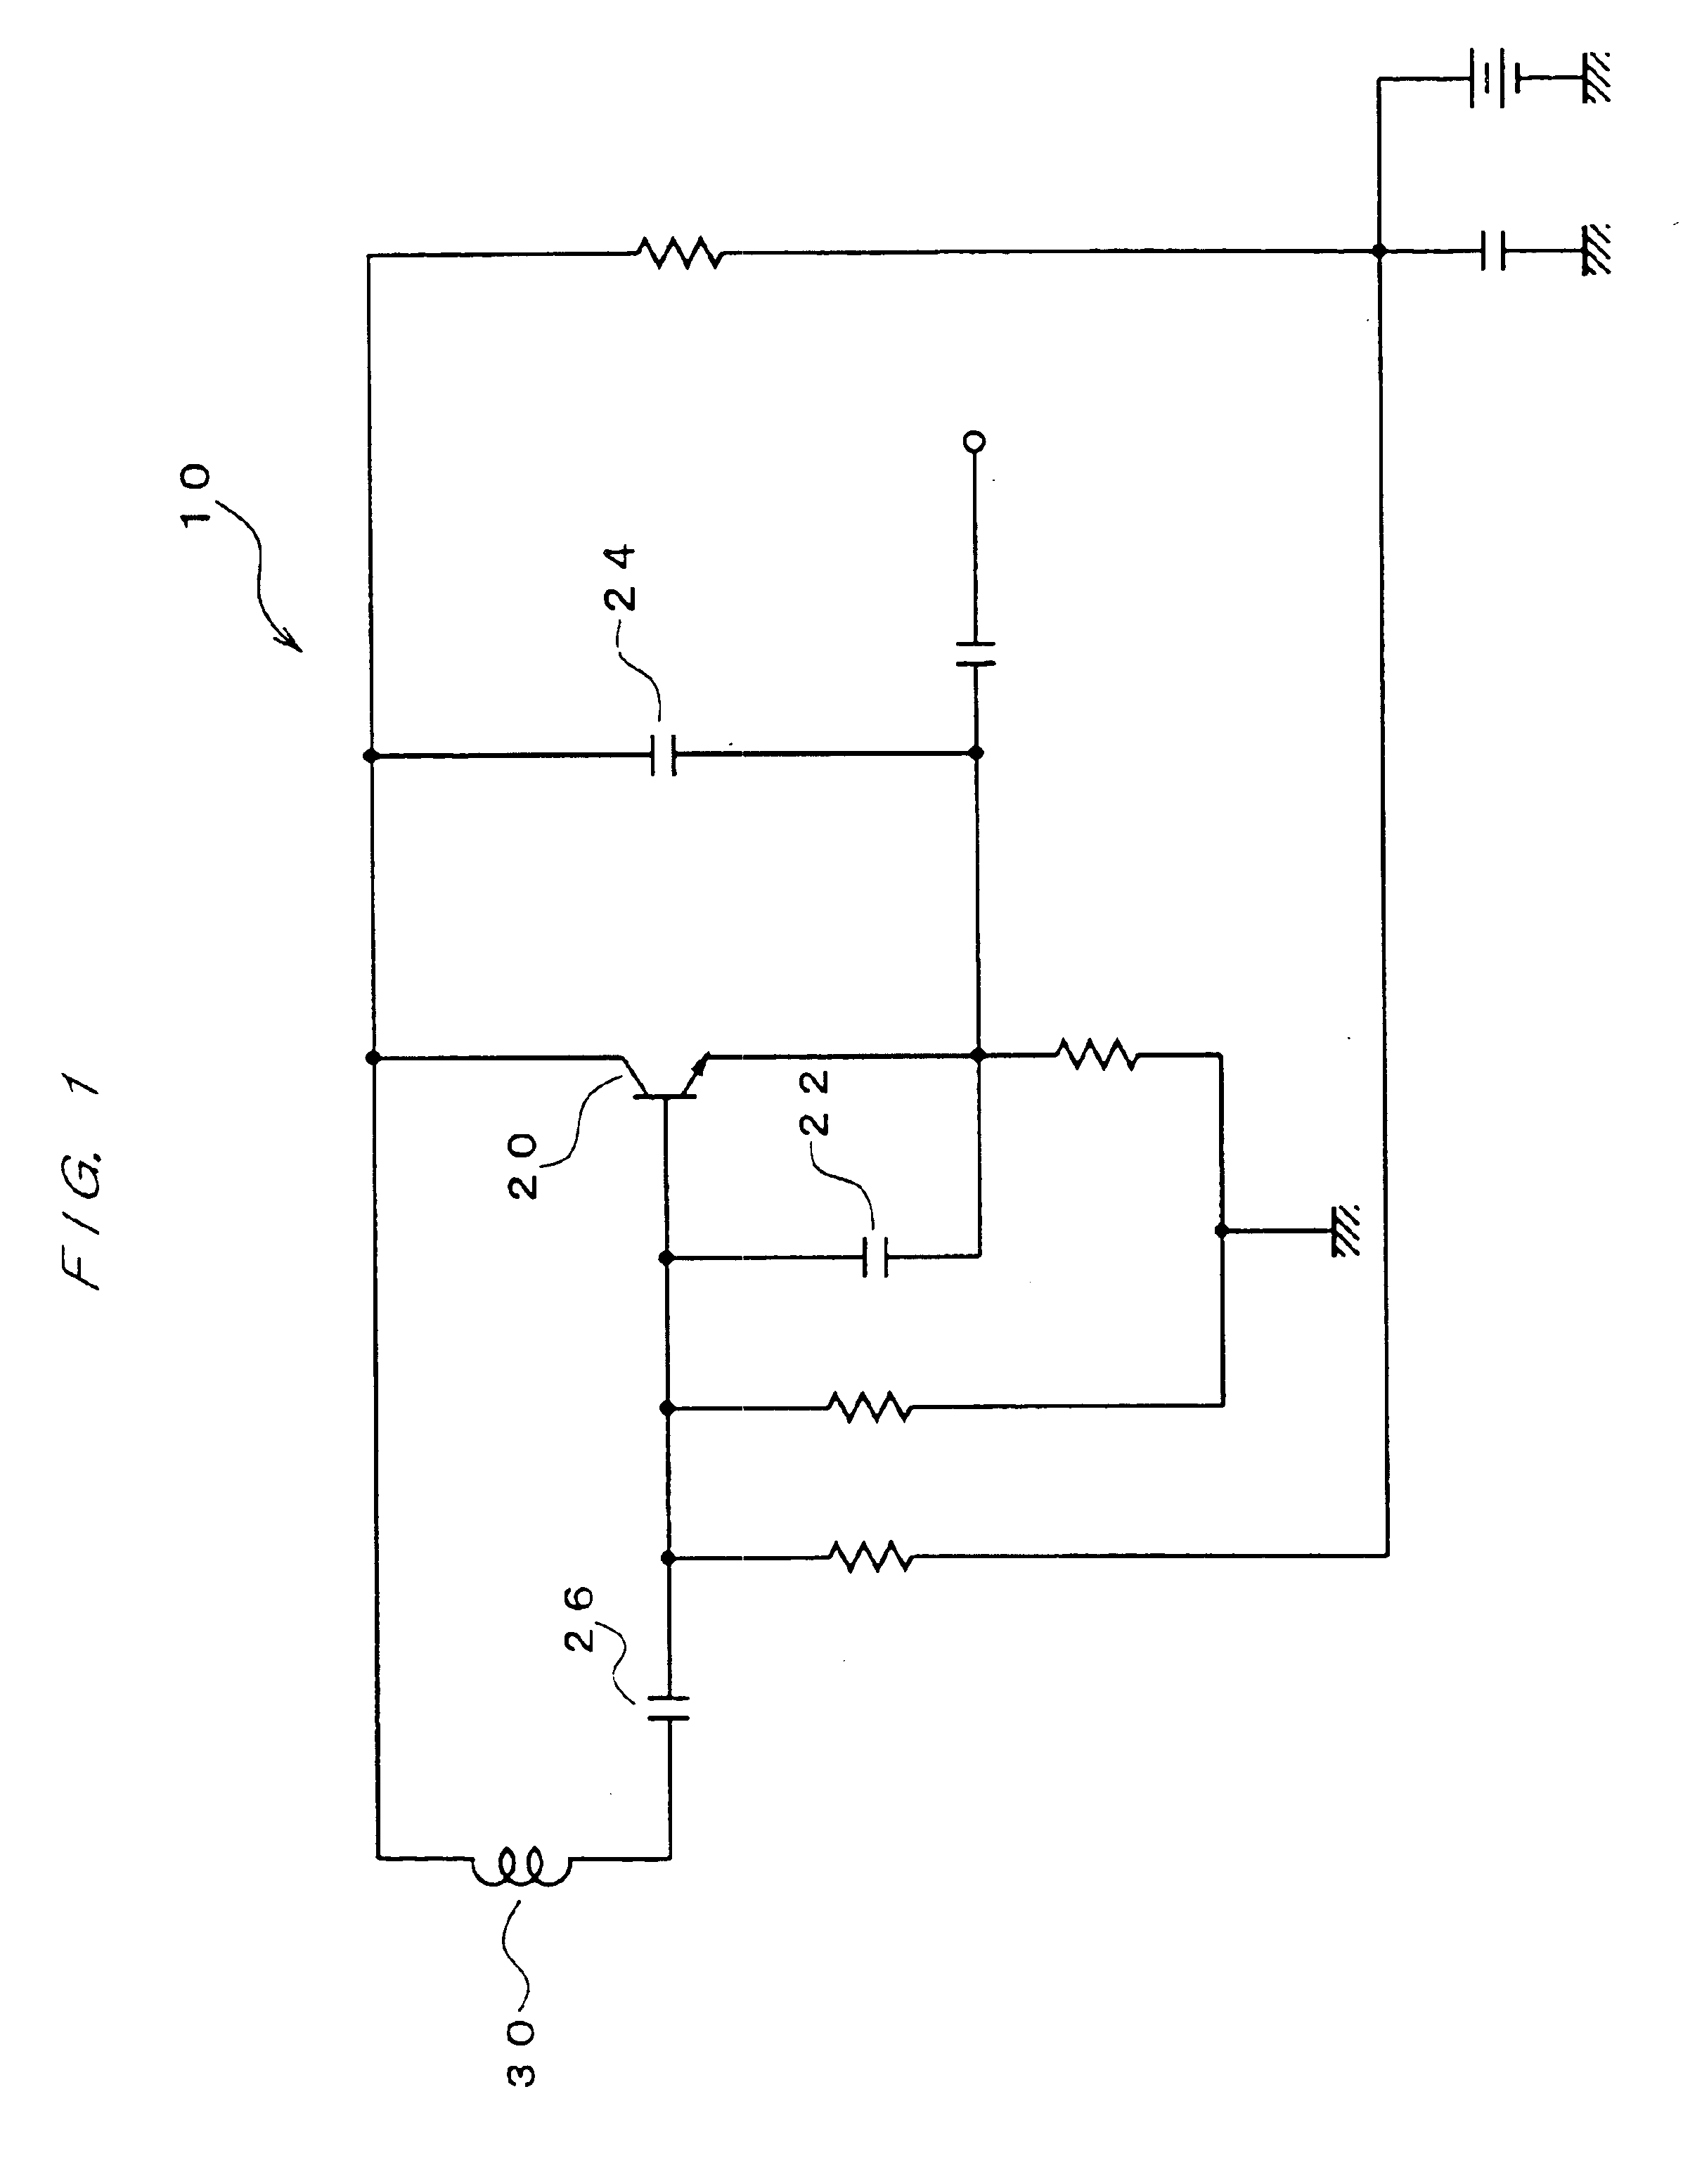 LC oscillator formed on a substrate